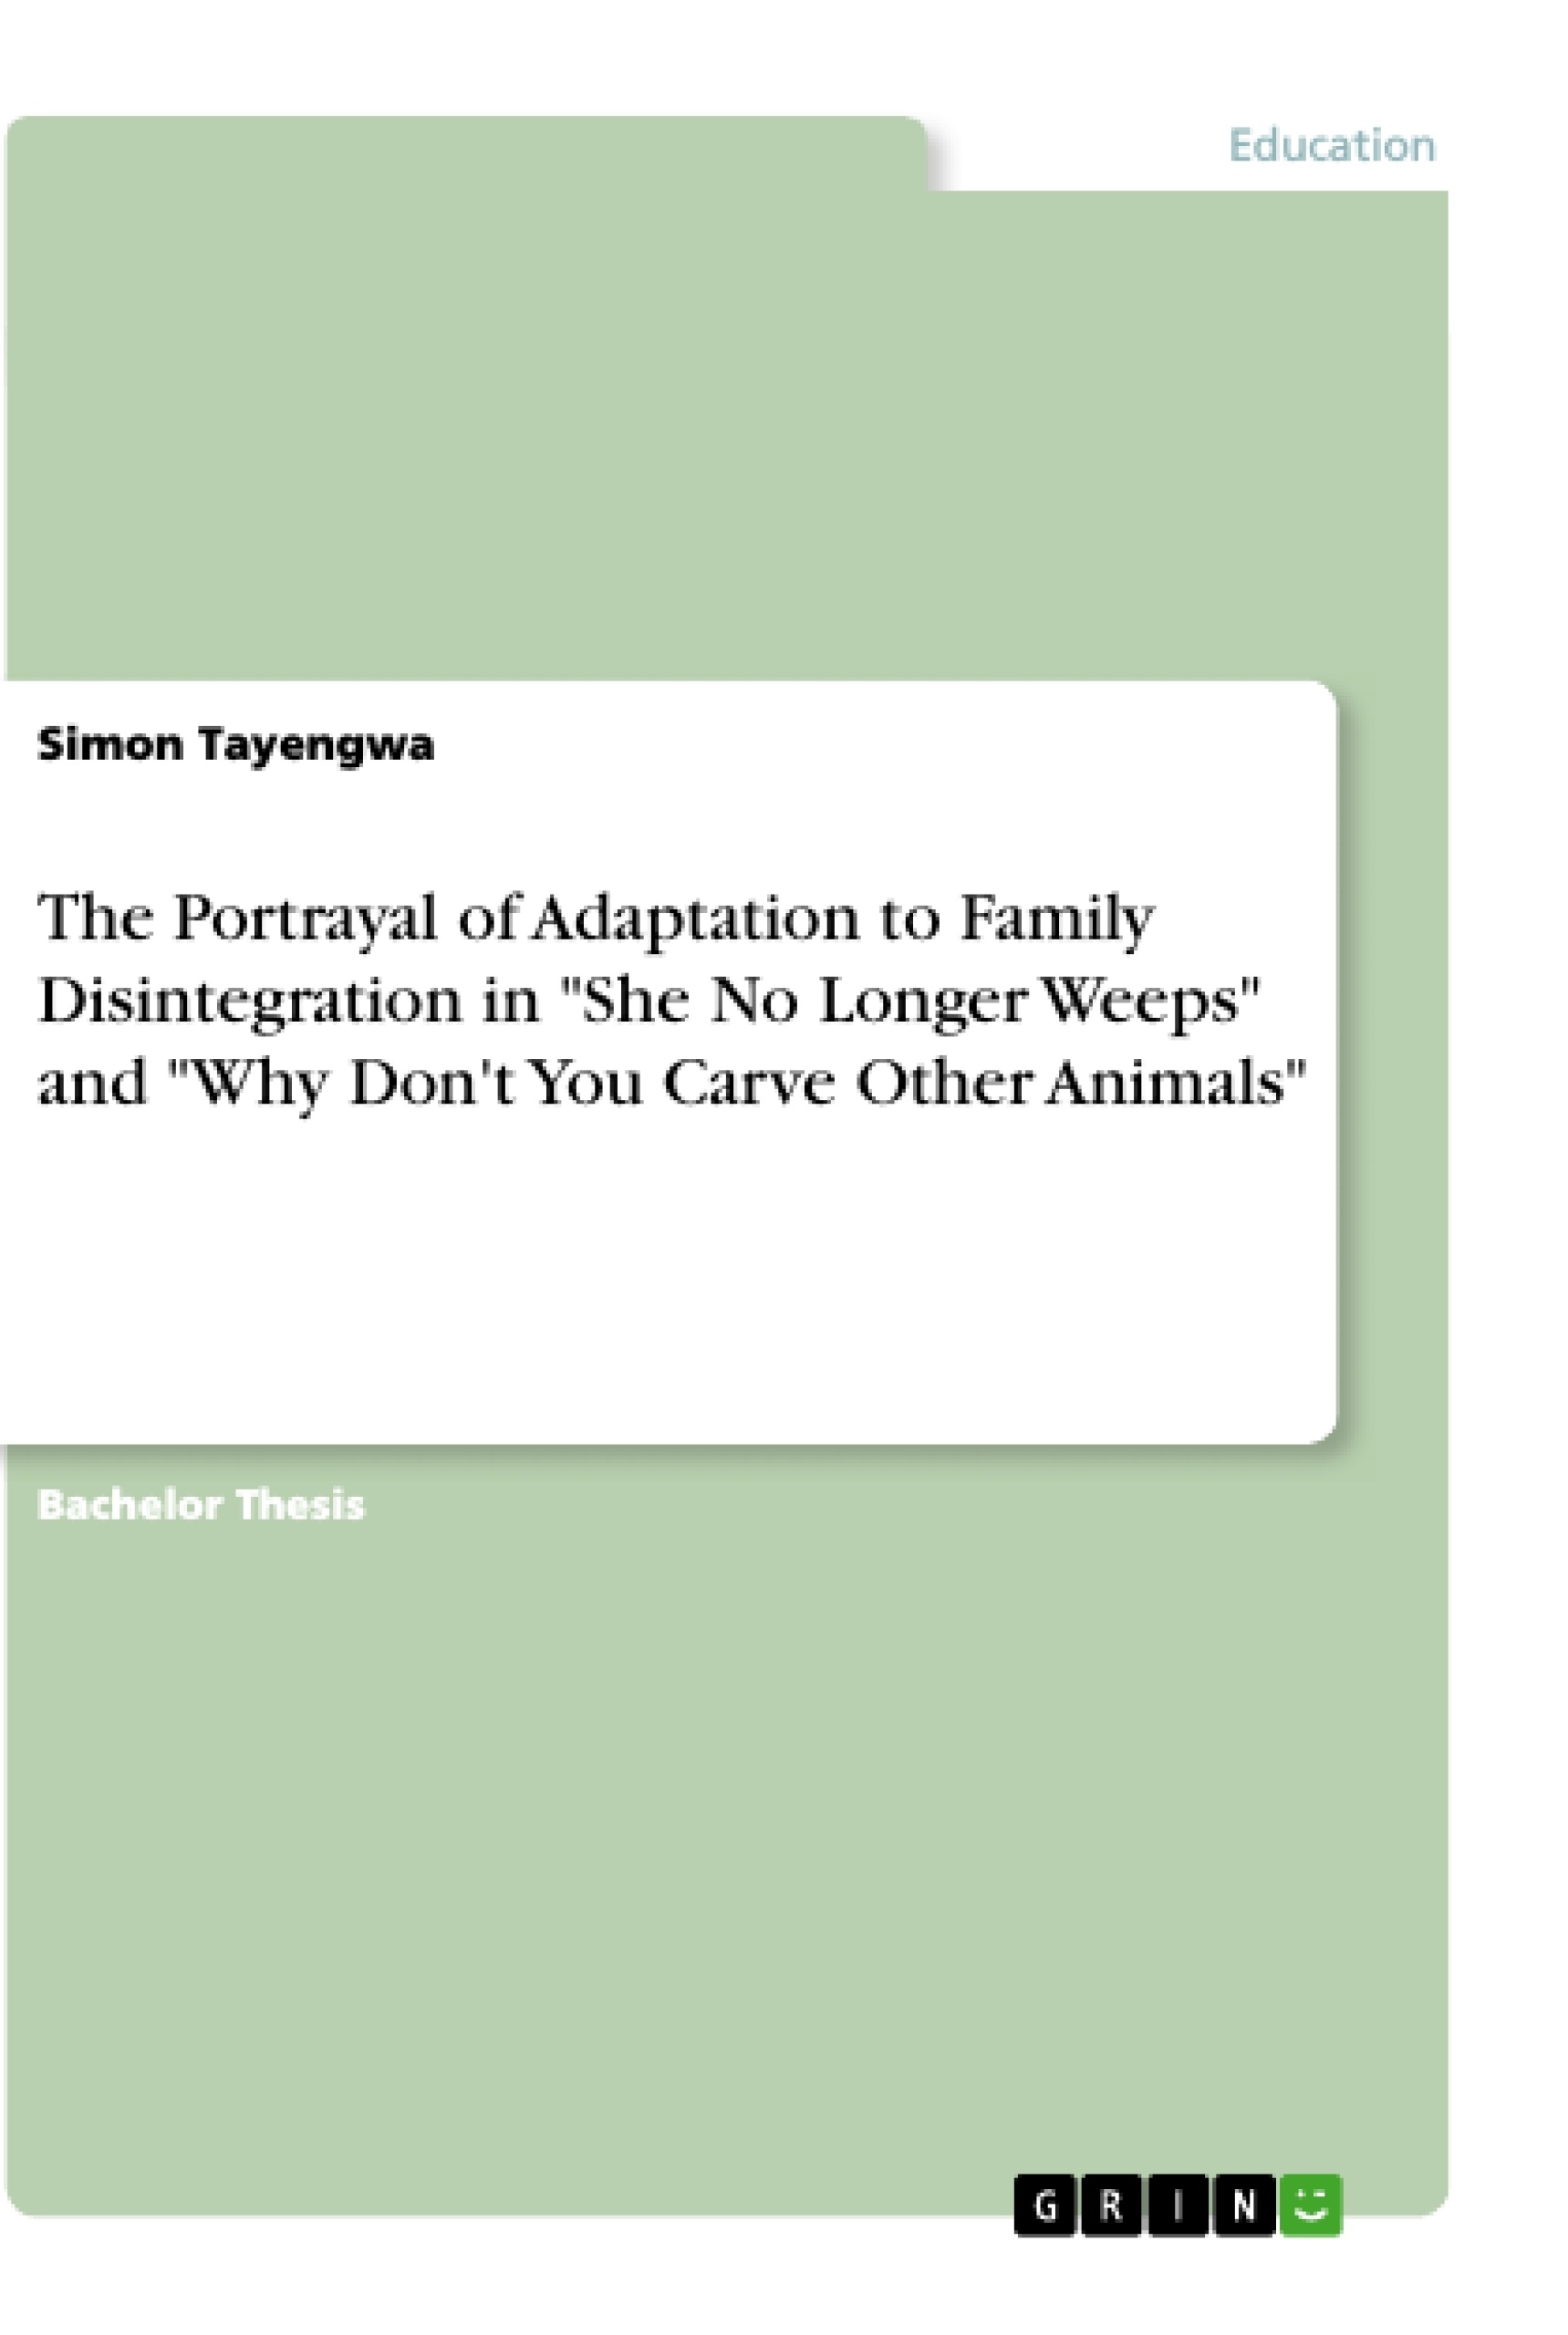 Título: The Portrayal of Adaptation to Family Disintegration in "She No Longer Weeps" and "Why Don't You Carve Other Animals"